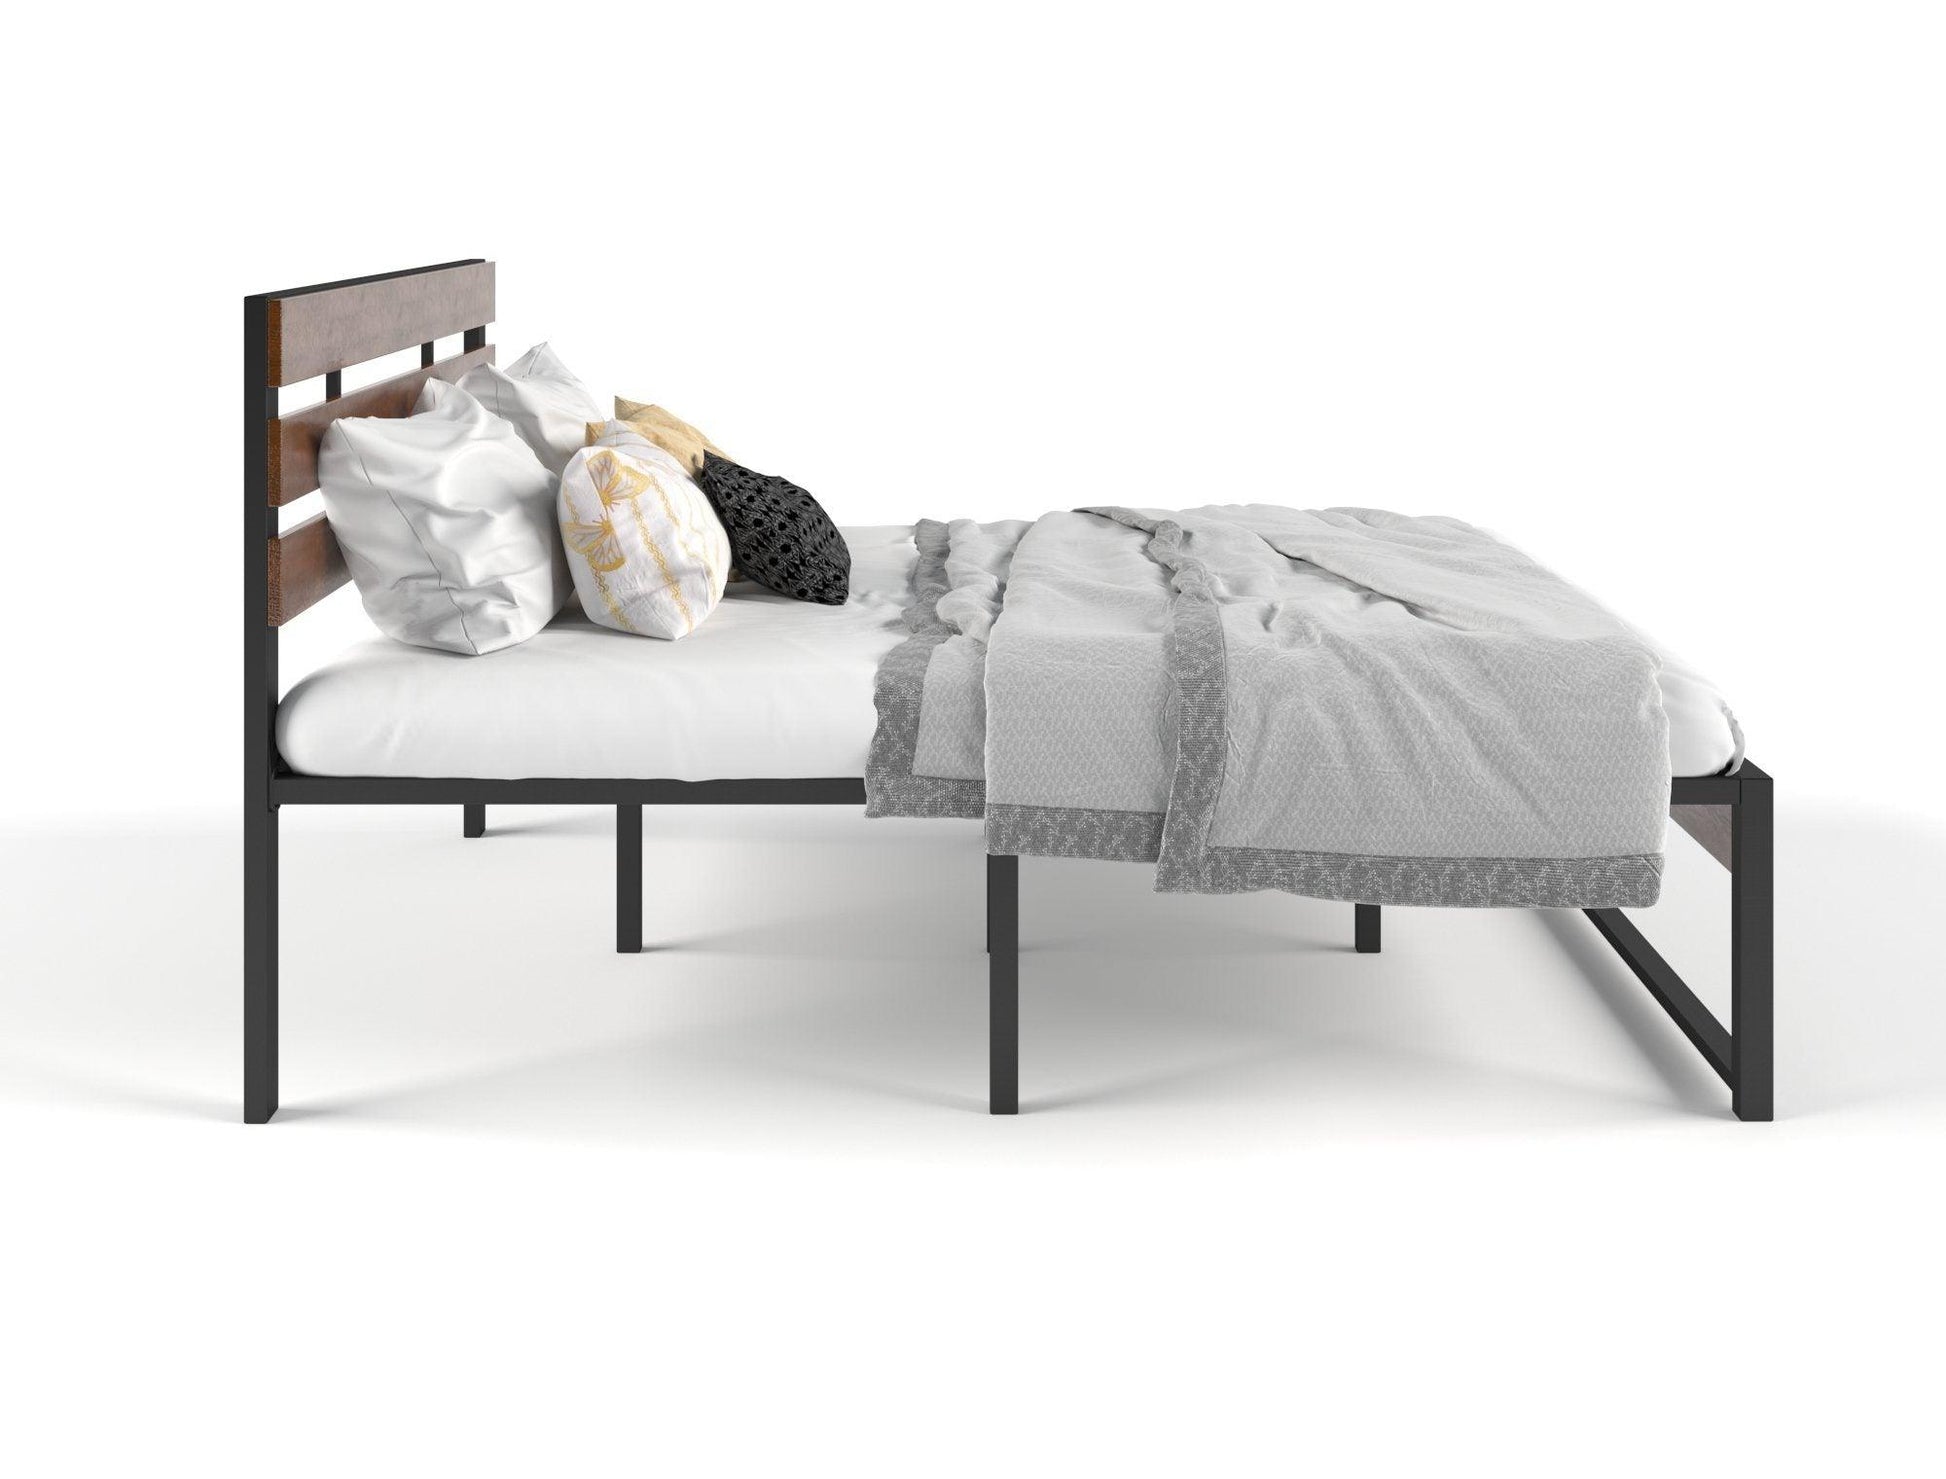 Ora Wooden and Metal Bed Frame King